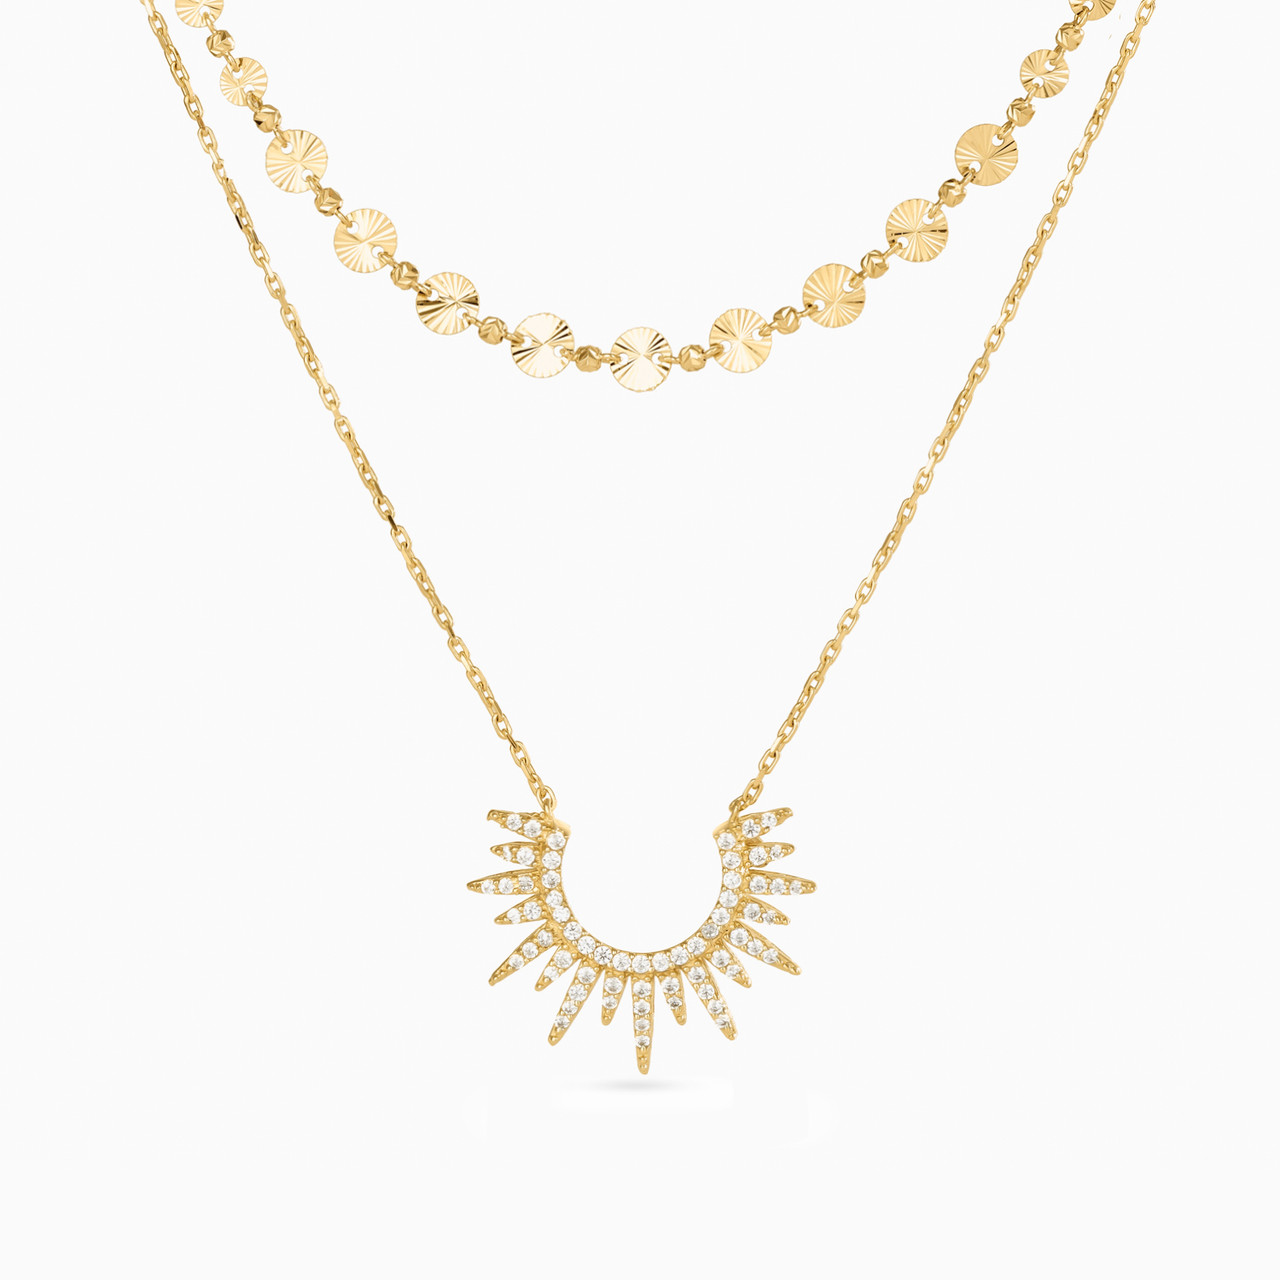 18K Gold Cubic Zirconia Layered Necklace